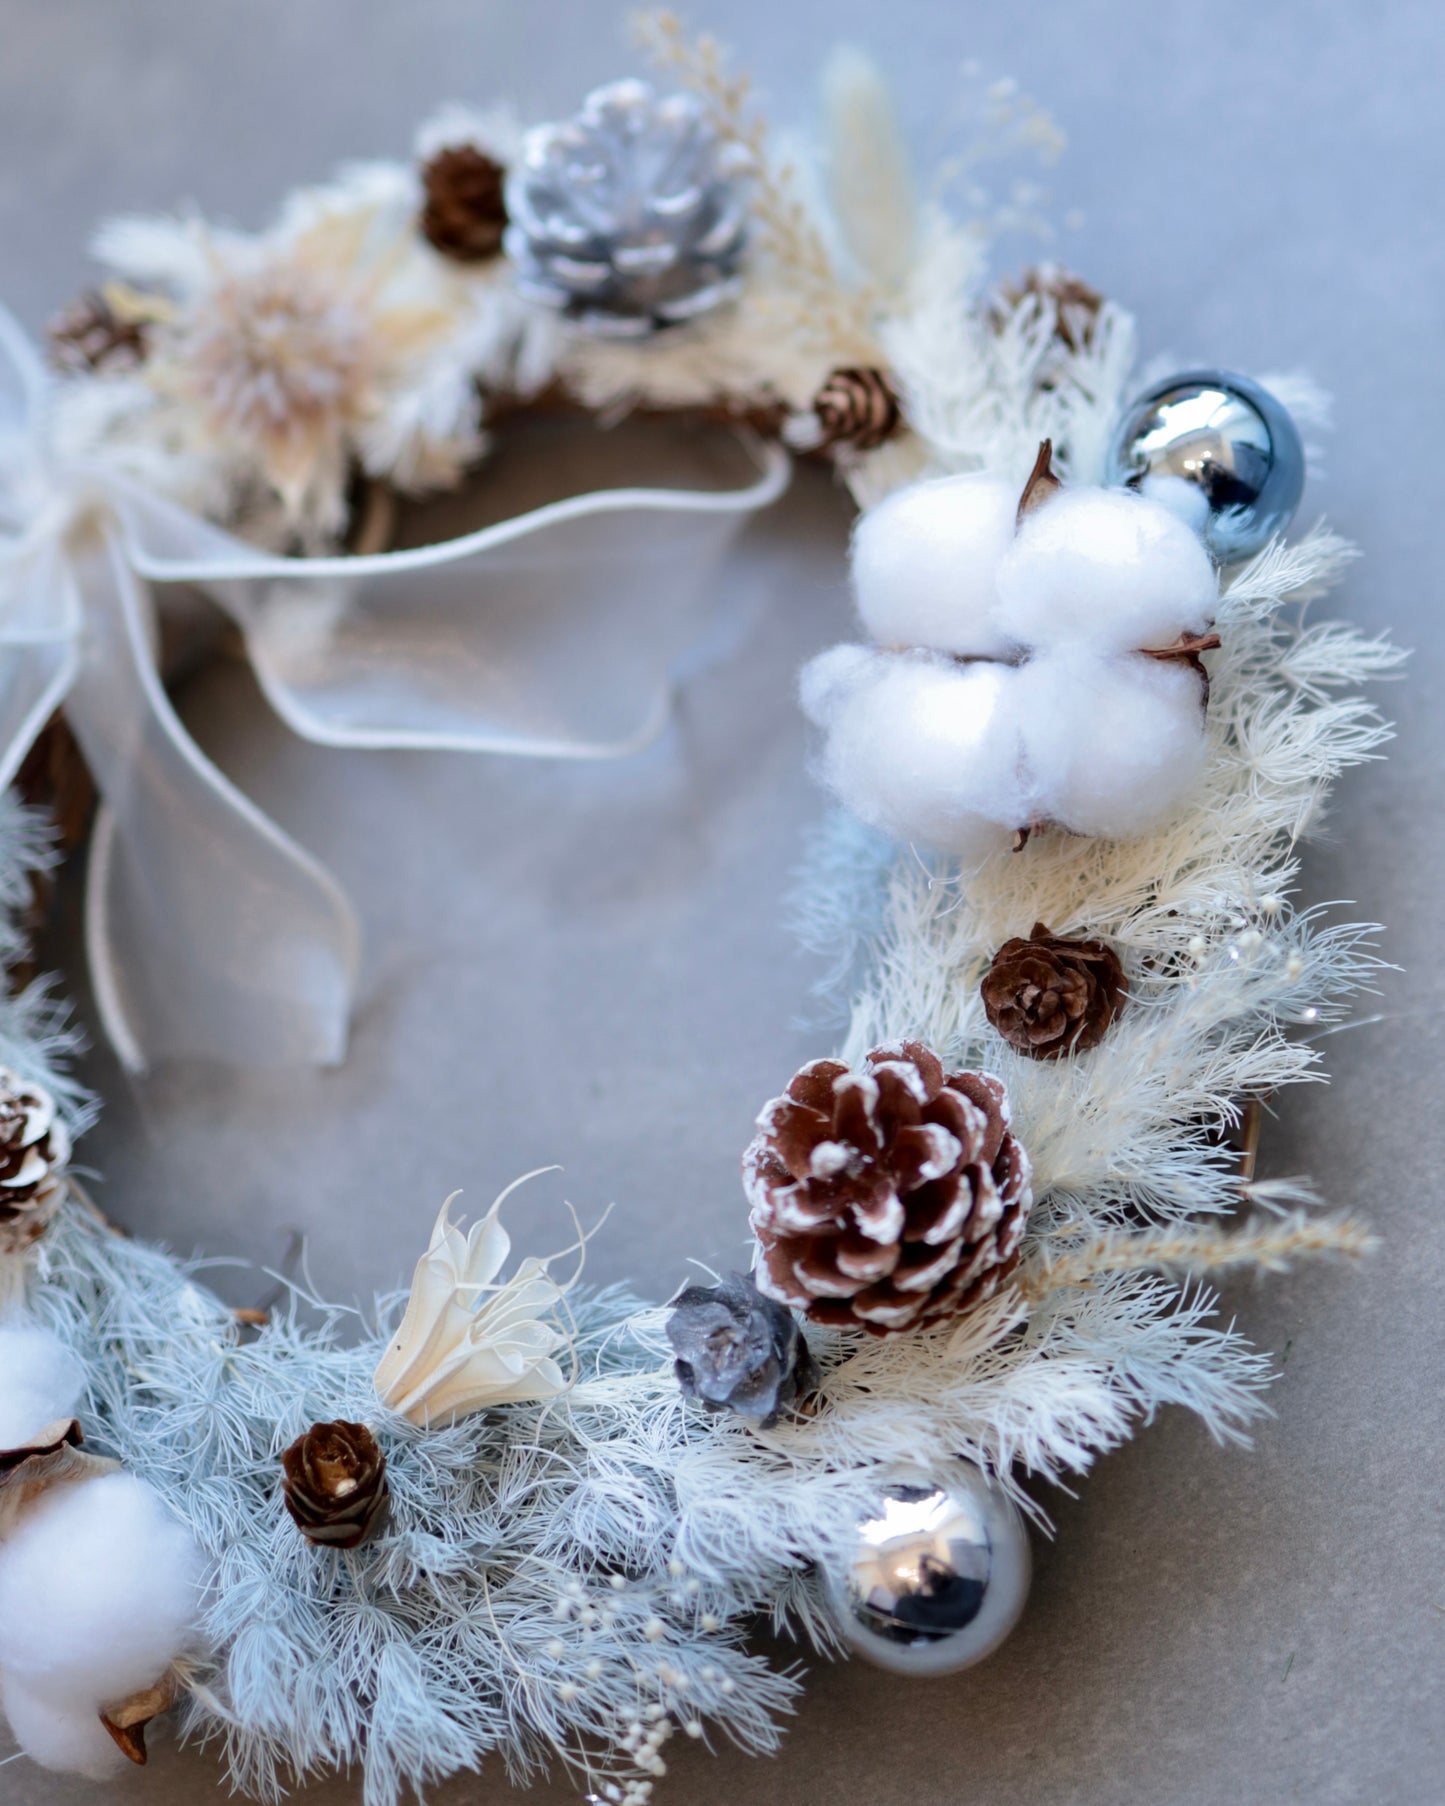 Rounded Shape Christmas Wreath Workshop with Preserved and Dried Flowers